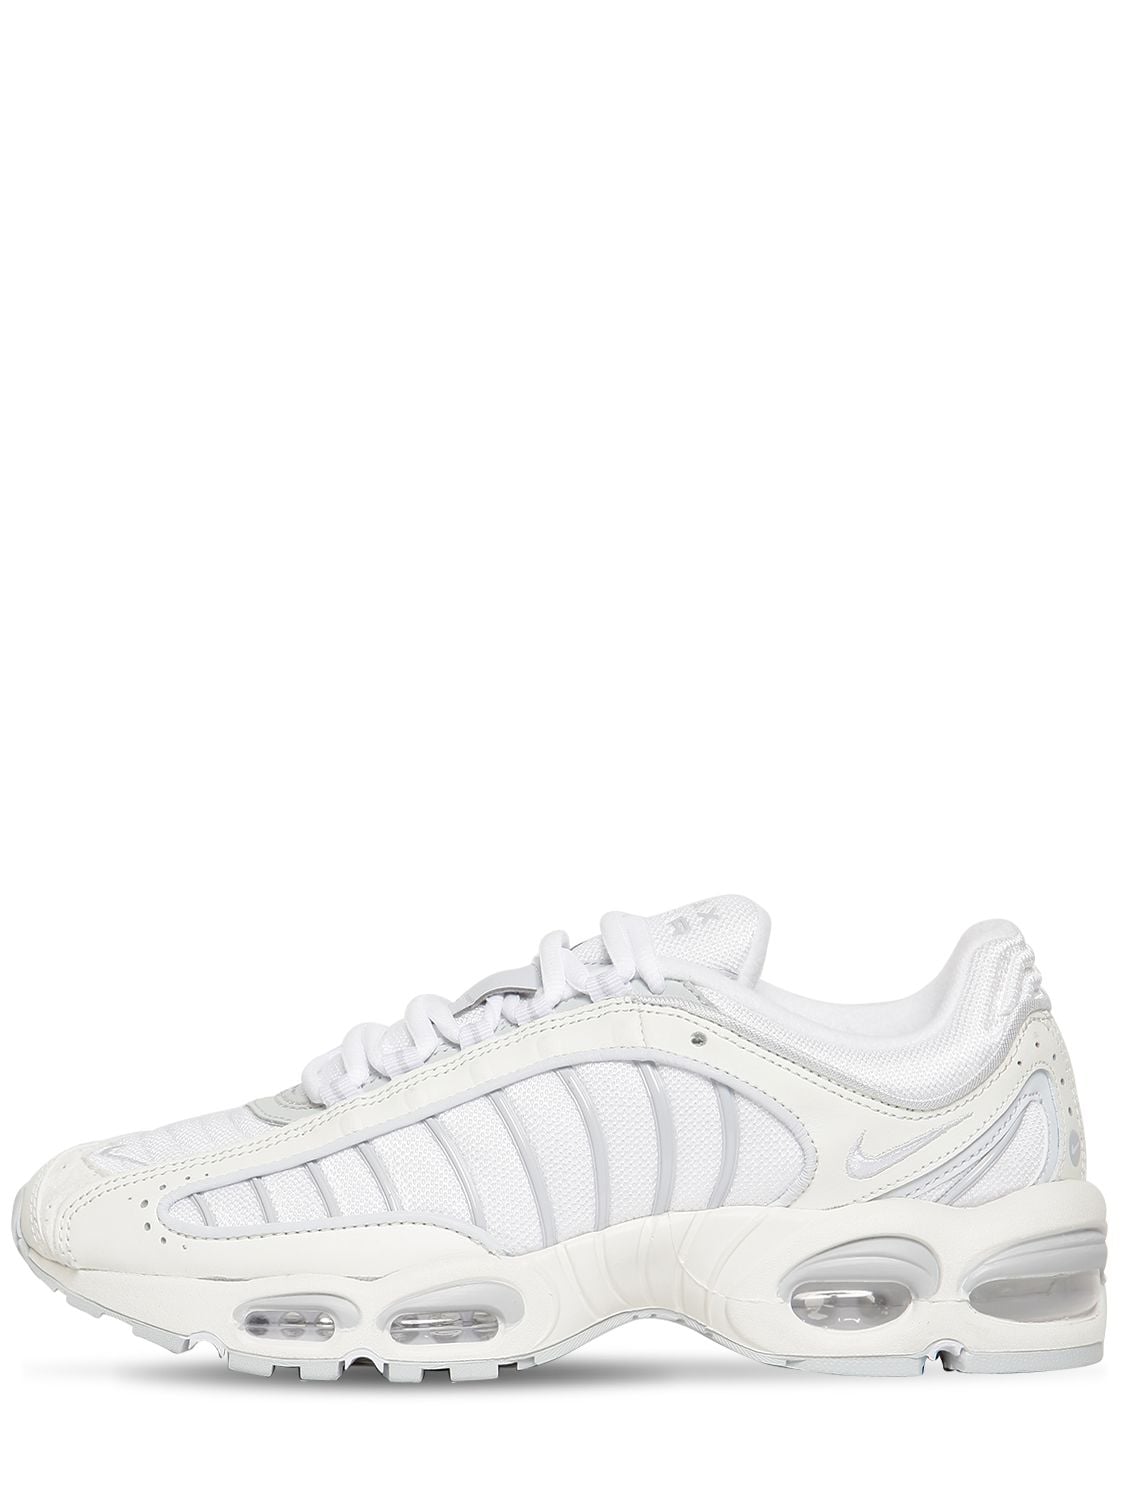 Buy Air Max Tailwind Iv Sneakers for 